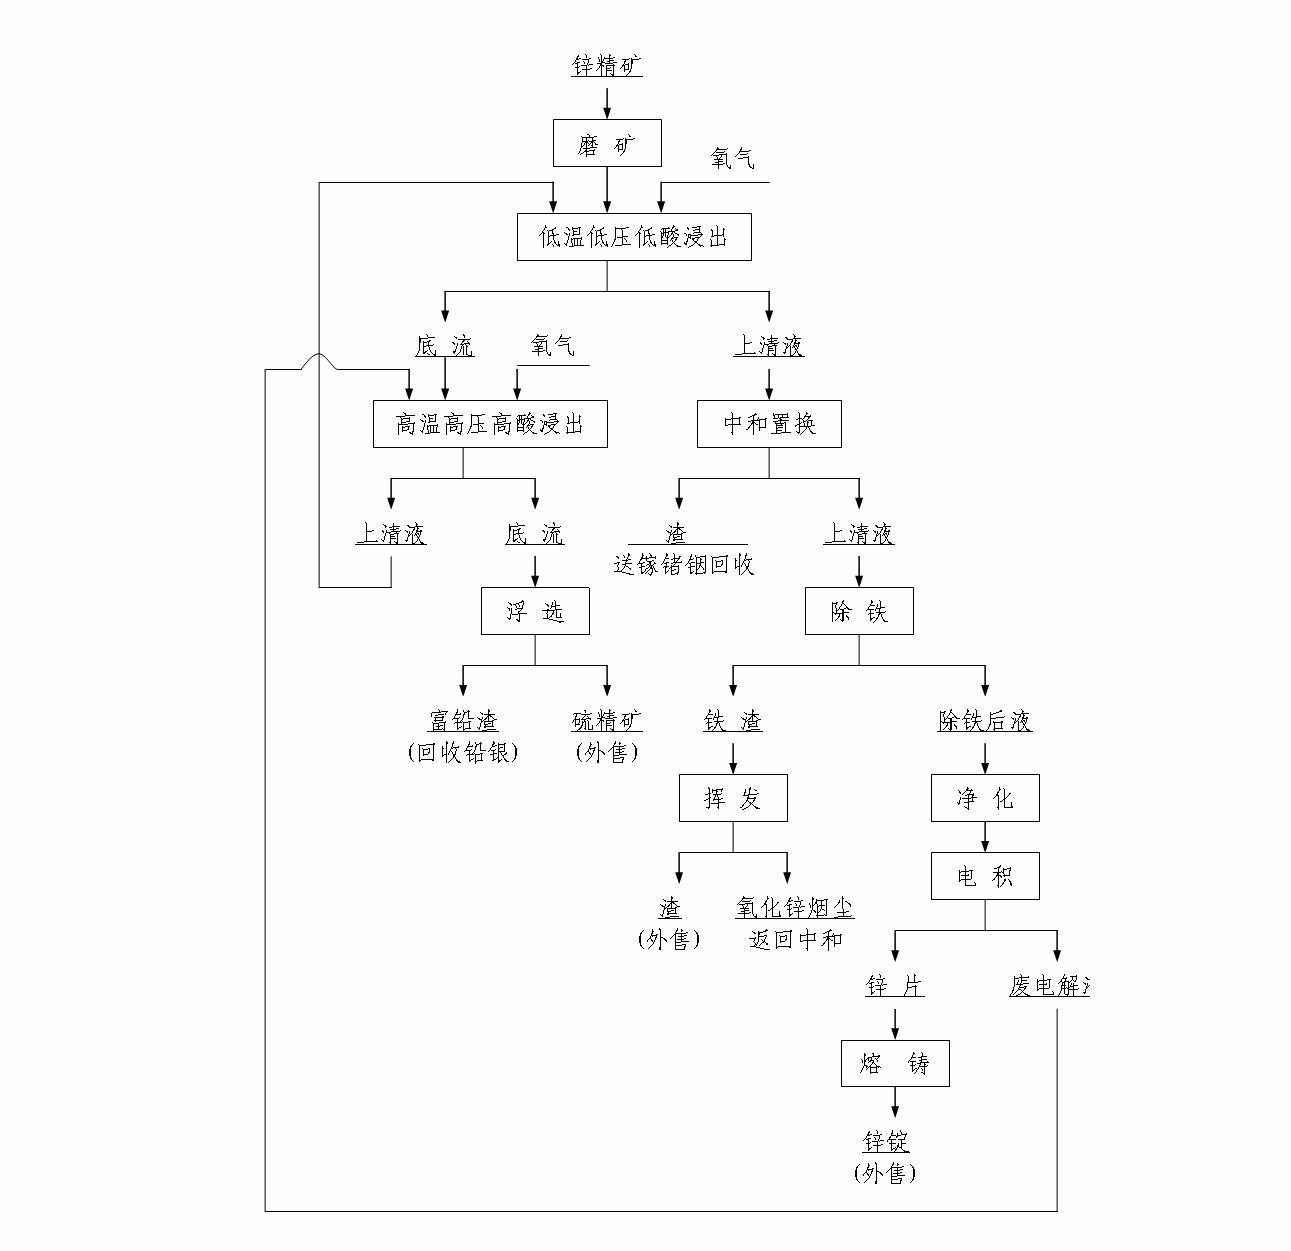 Method for directly leaching zinc and recovering gallium, germanium and indium from zinc sulfide concentrate